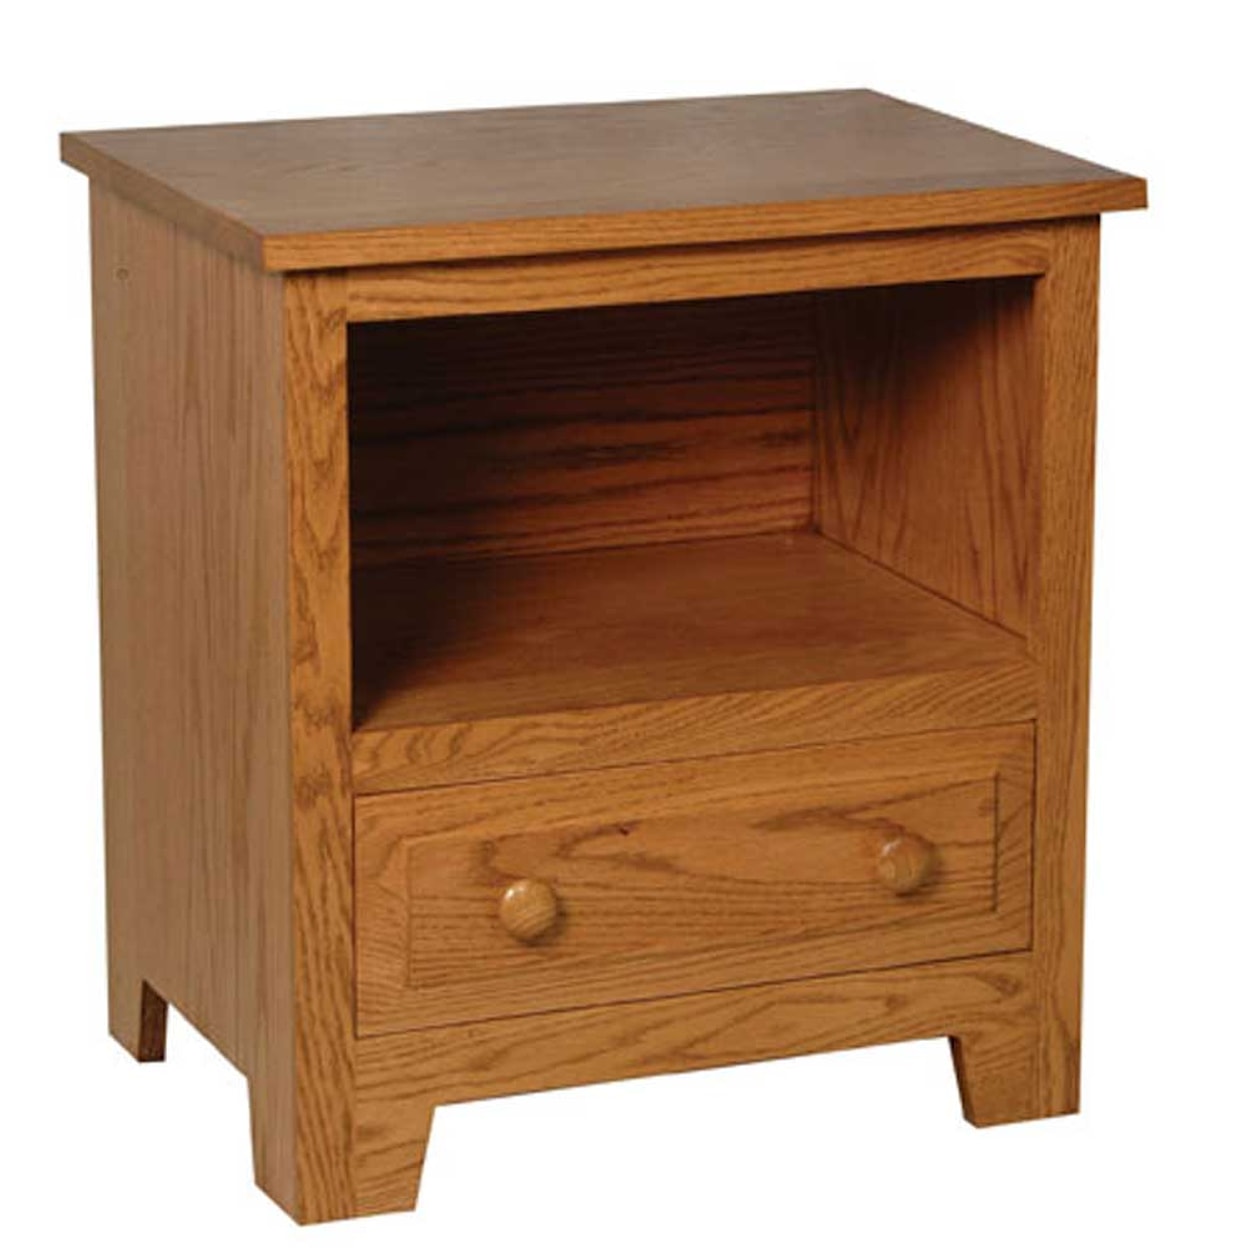 Simply Amish Homestead Amish Nightstand w/ Opening